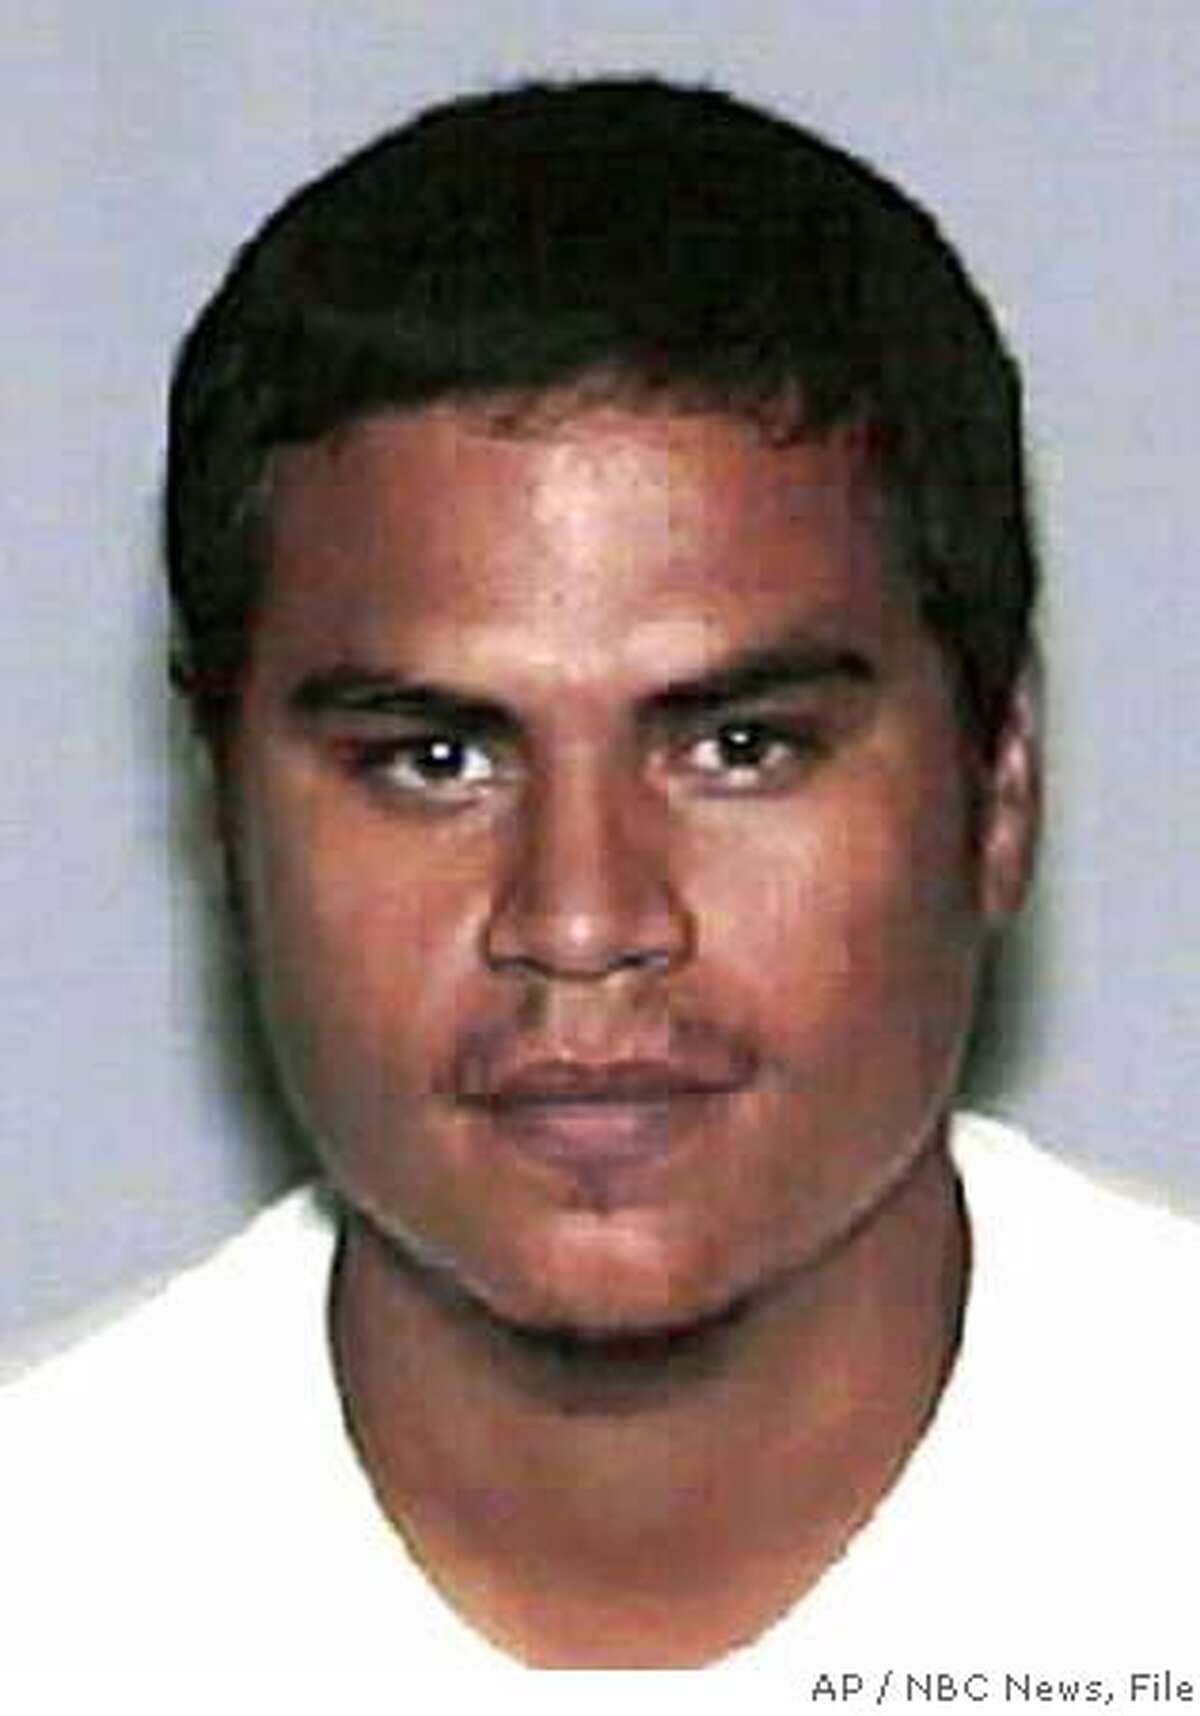 ** FILE ** Jose Padilla is shown in this undated file photo. The U.S. Supreme Court agreed Wednesday, Jan. 4, 2005 to let the military transfer Padilla to Miami to face criminal charges. (AP Photo/NBC News, File) ** MANDATORY CREDIT NBC NEWS; ** Ran on: 01-05-2006 Jose Padilla had been held in a Navy brig for over three years without being allowed to fight the charges. Ran on: 07-14-2006 Jose Padilla, charged with conspiring to wage terrorism, is allowed to see classified material. MANDATORY CREDIT/ /UNDATED AN UNDATED FILE PHOTO